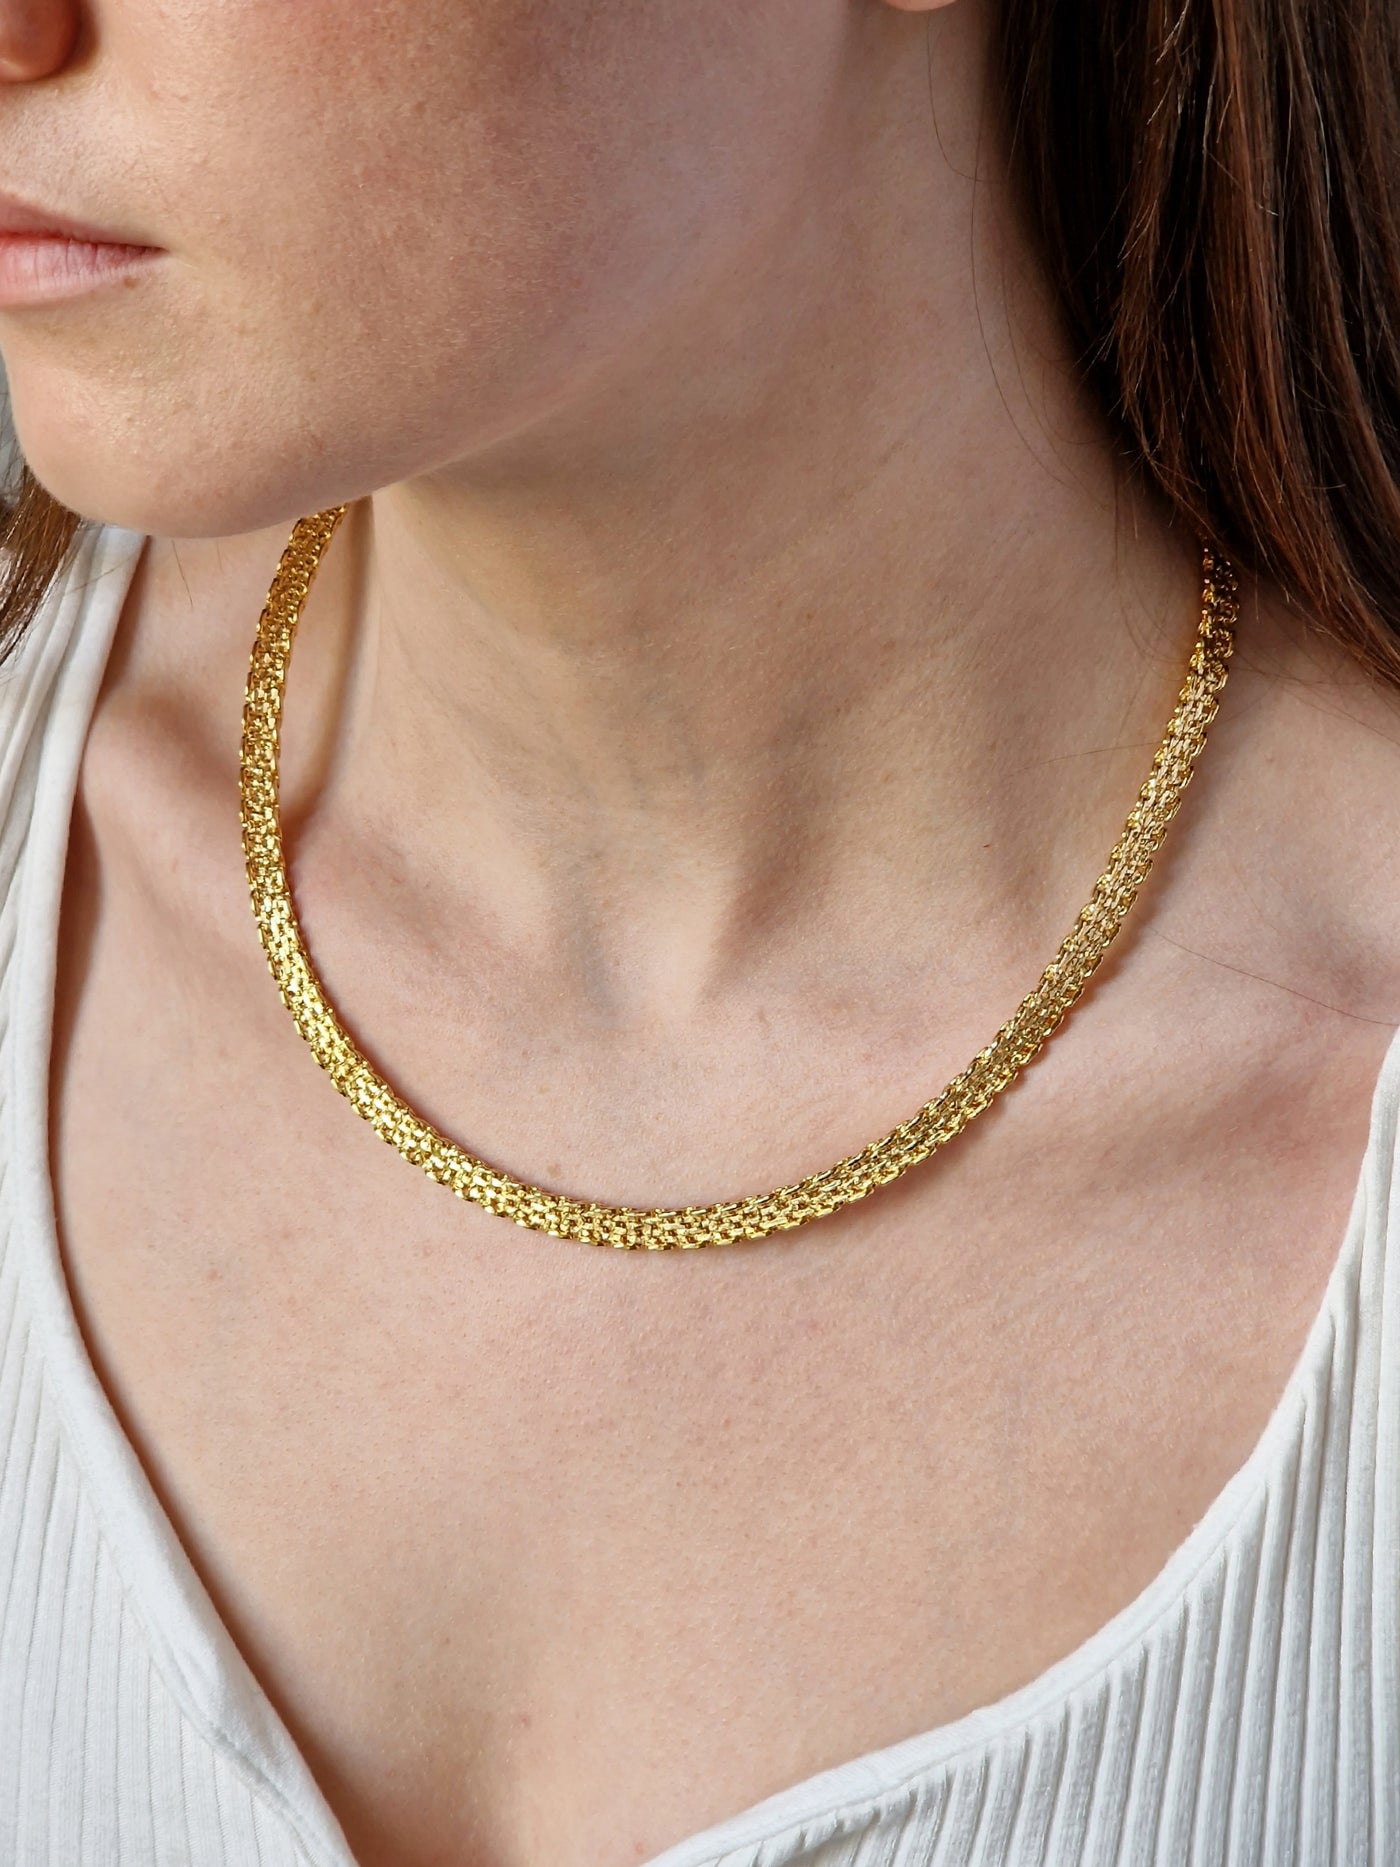 Vintage Gold Plated Thin Mesh Chain Necklace